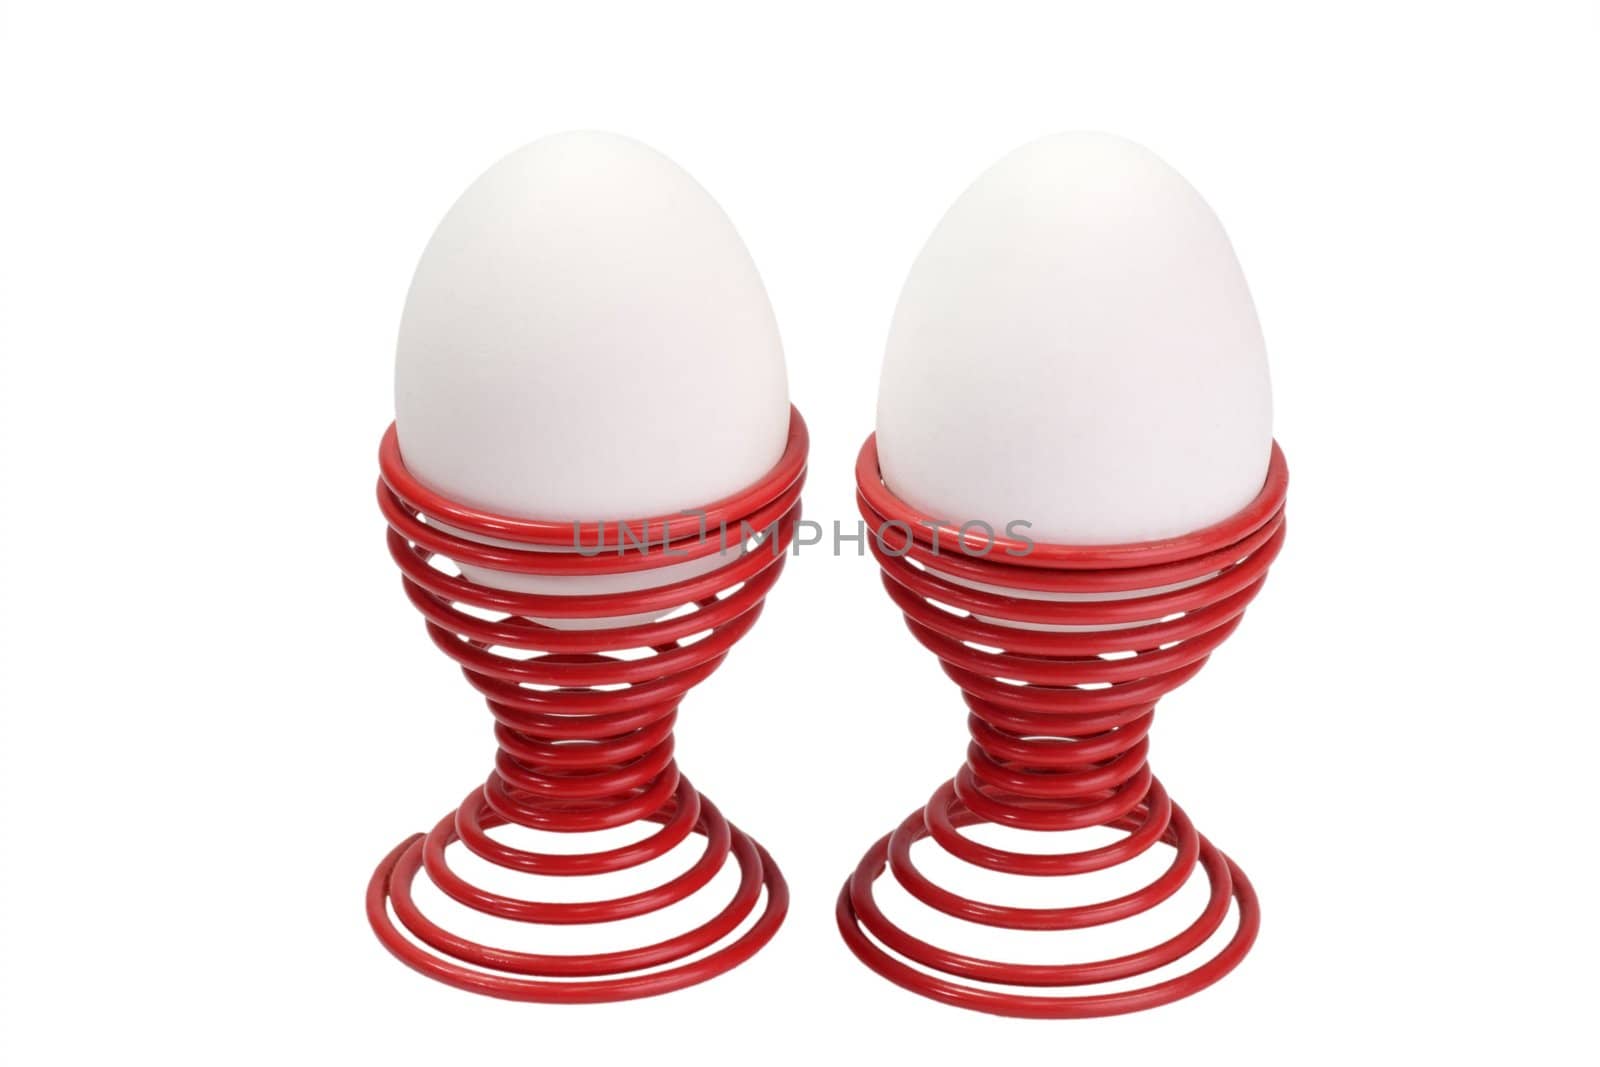 Two white eggs in eggcups - isolated on white background